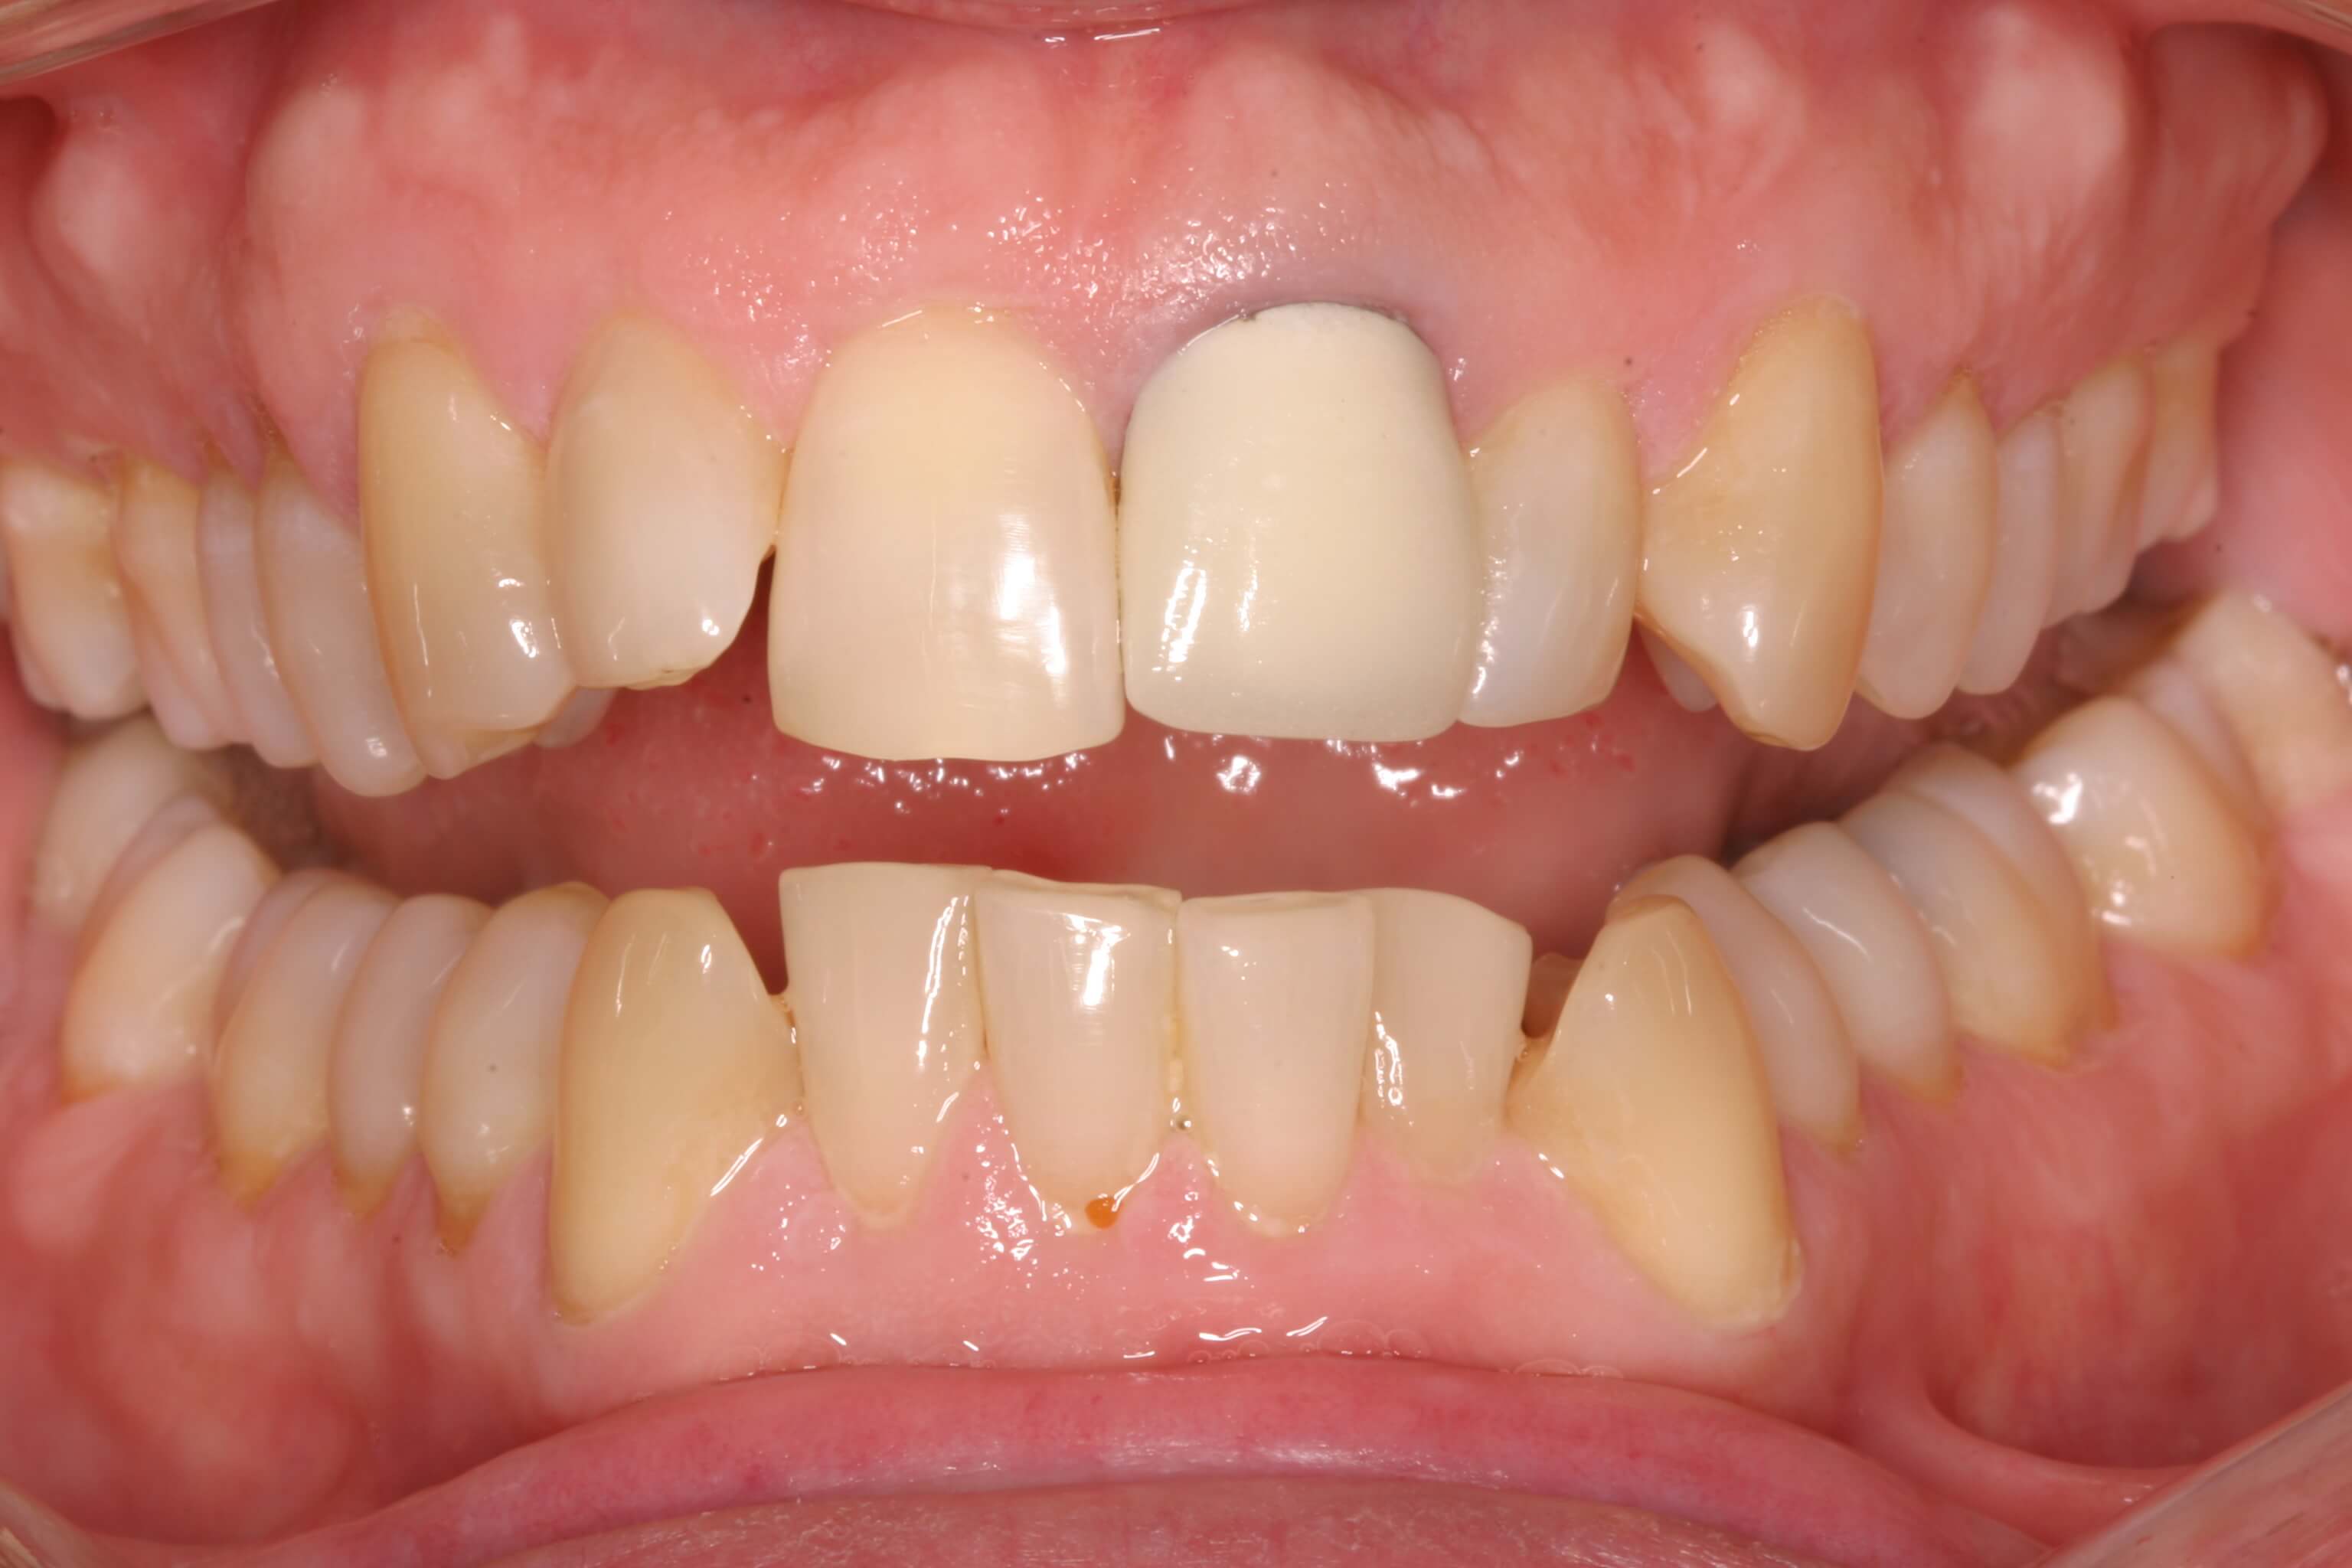 Reasons for tooth discoloration | News | Dentagama